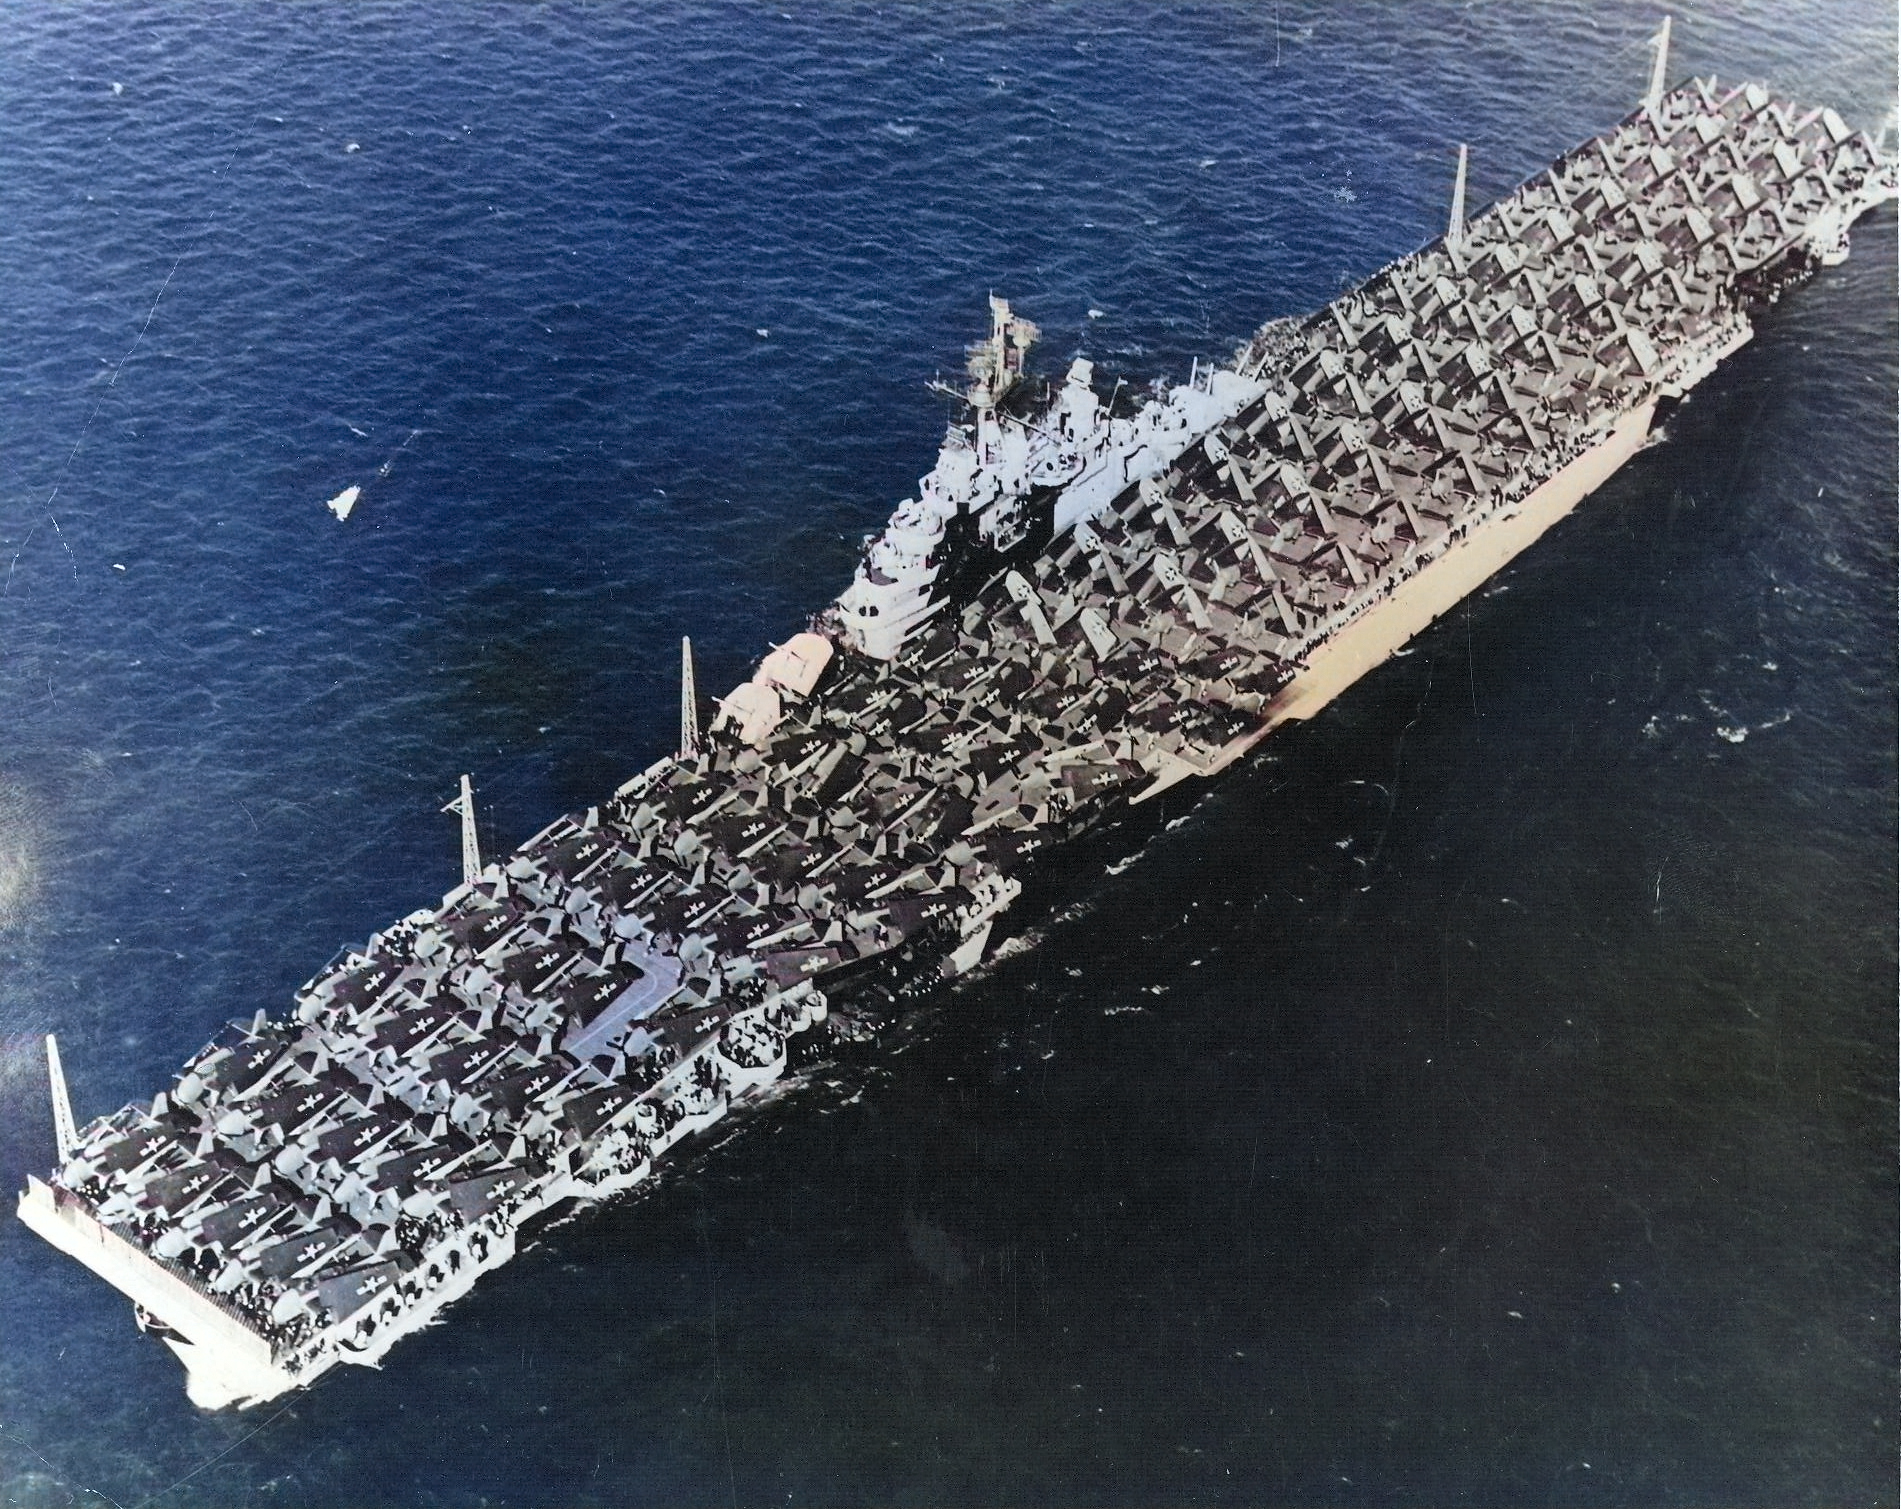 USS Essex departing San Francisco Naval Shipyard, California, United States, 15 Apr 1944, photo 4 of 4; note camouflage measure 32 design 6/10D [Colorized by WW2DB]